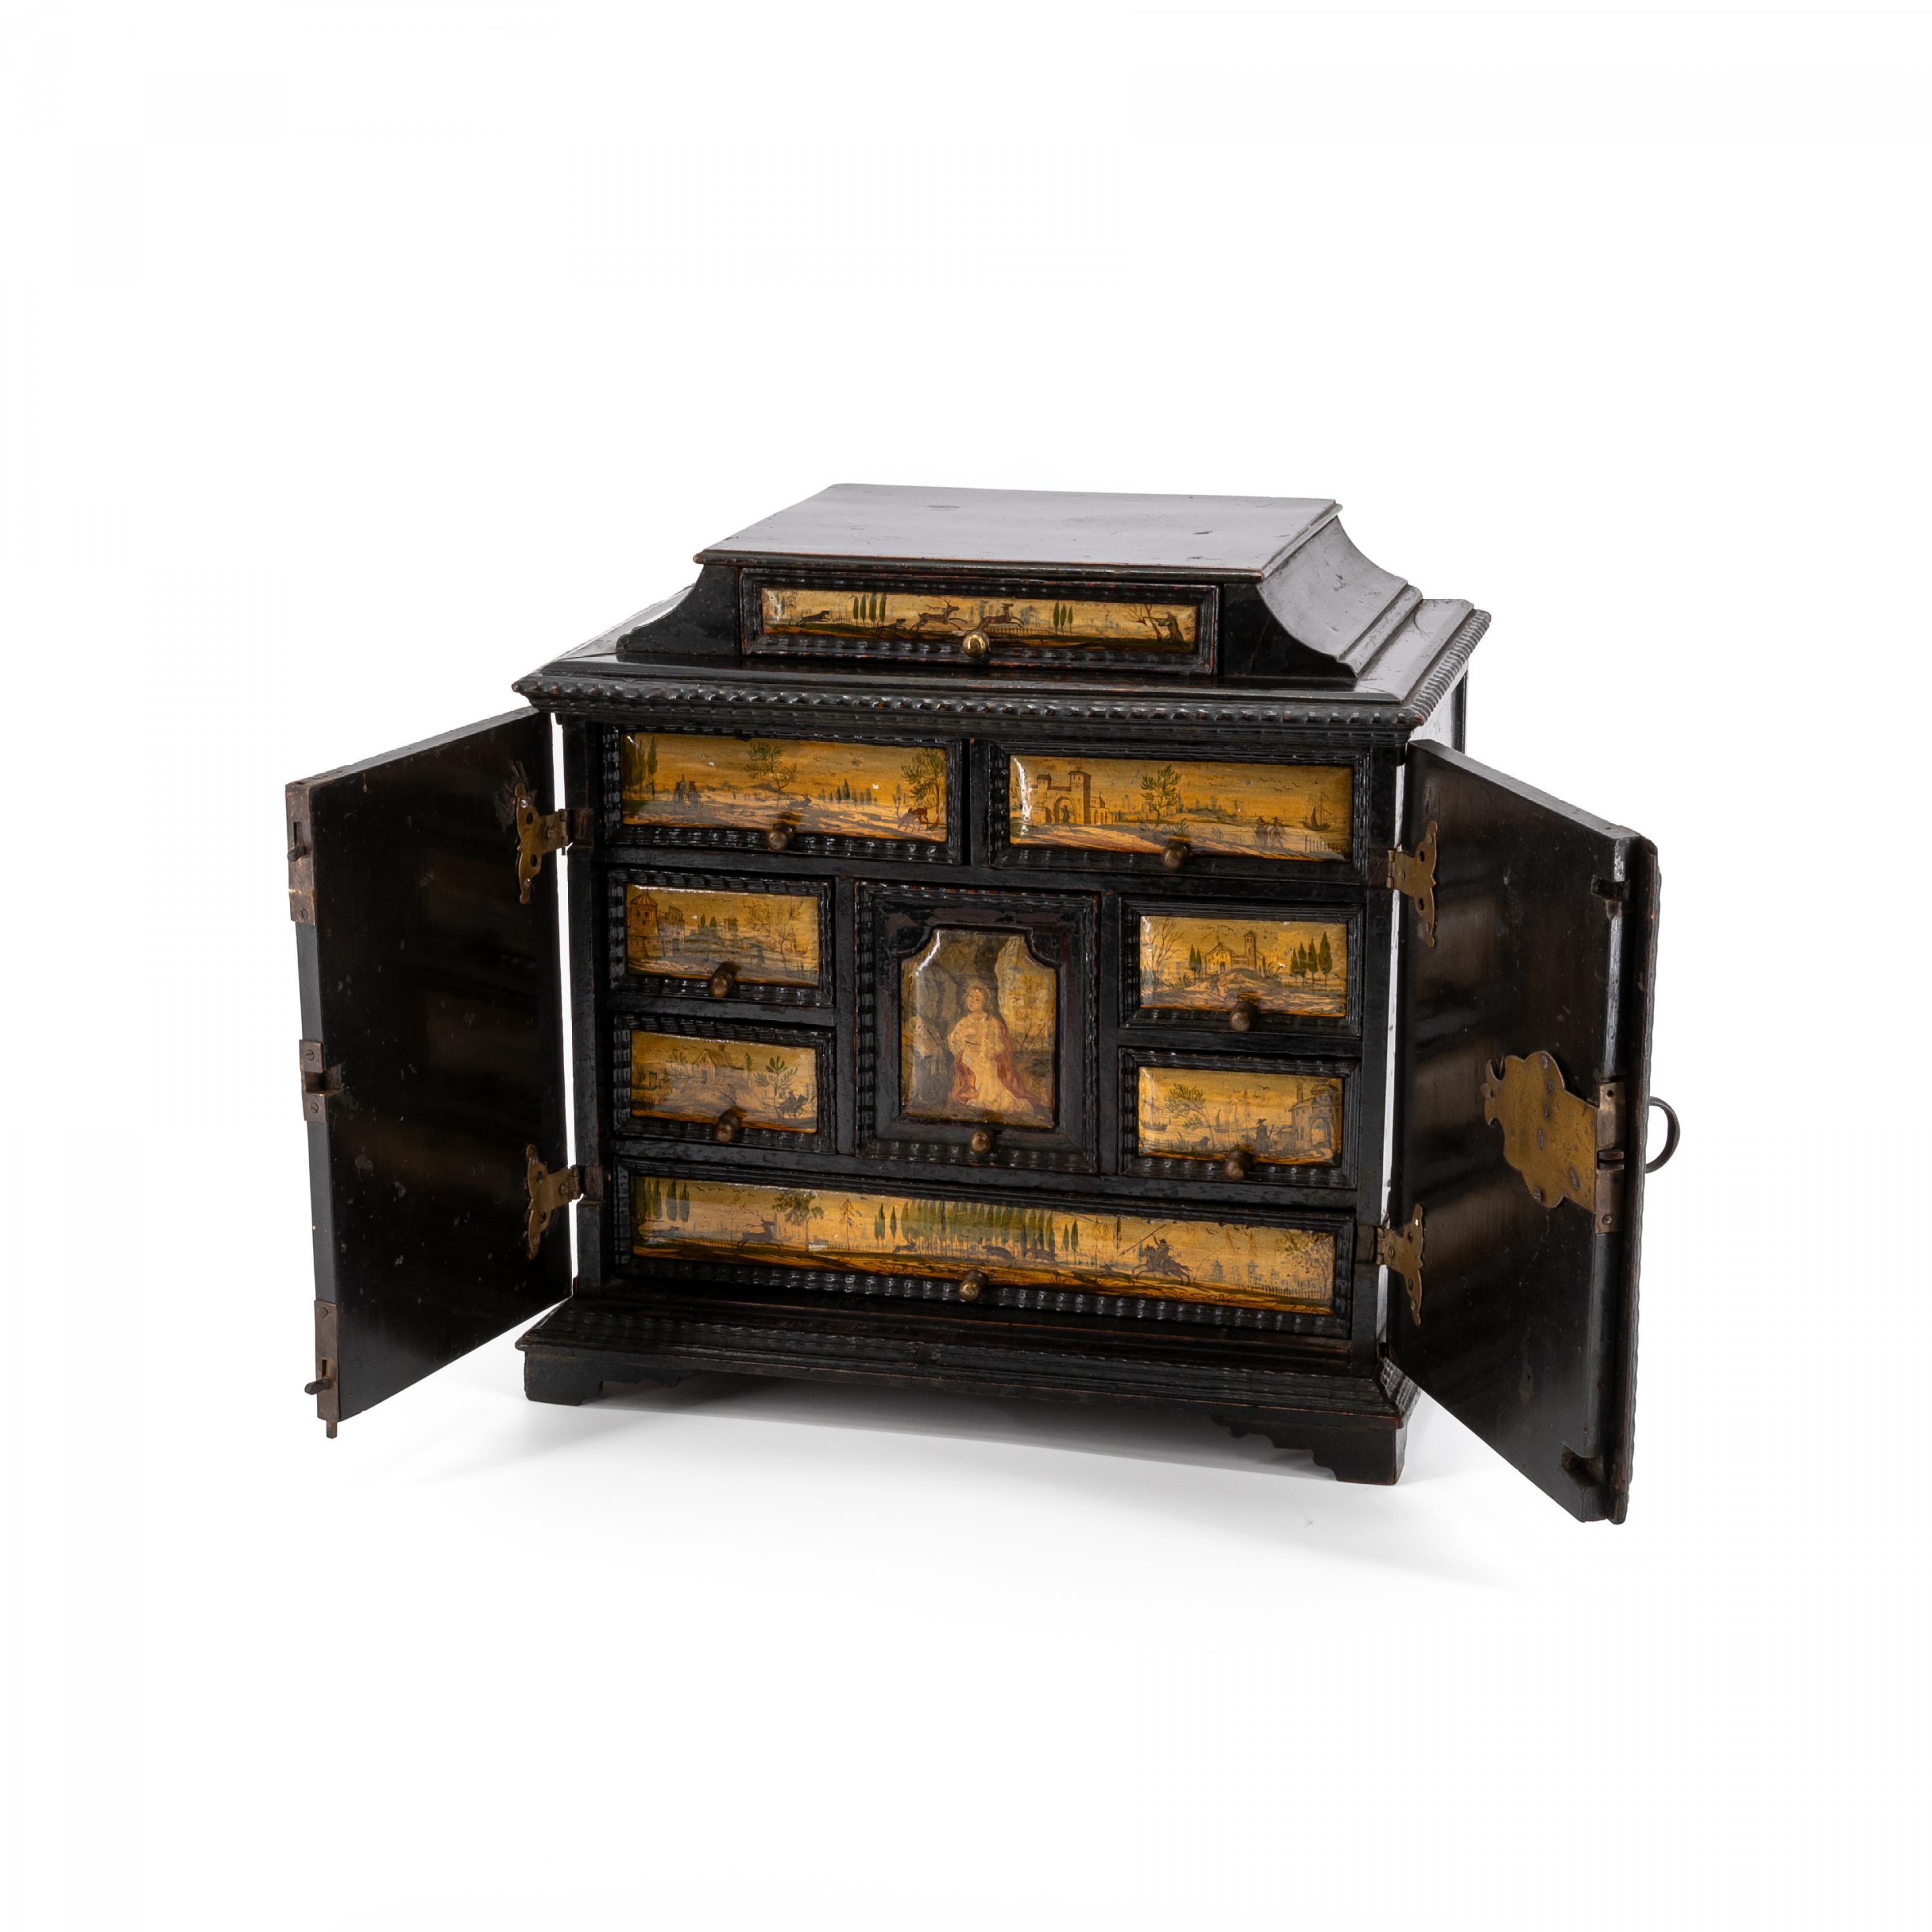 SOFTWOOD CABINET ON STAND WITH LANDSCAPES AND HUNTING SCENES - Image 2 of 7